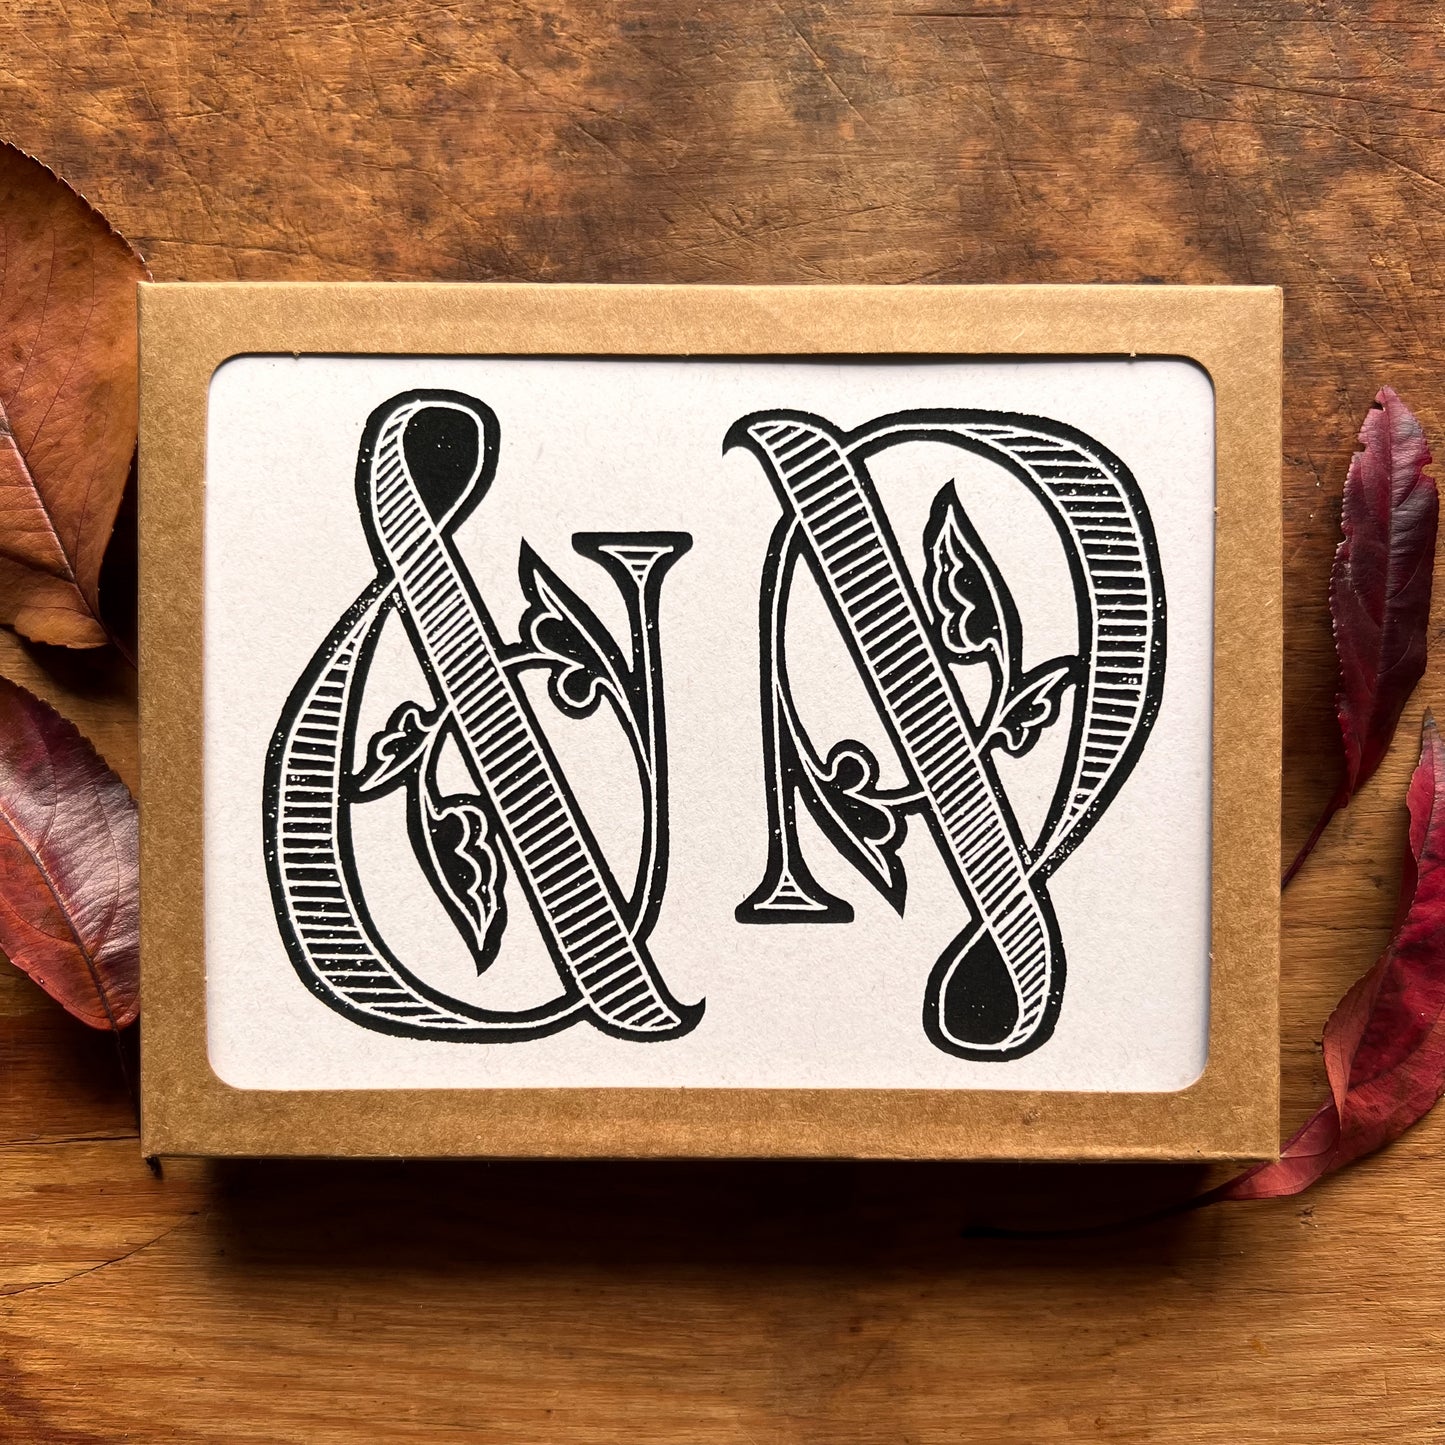 Ampersand Greeting Cards | Blank Inside, A2, Recycled